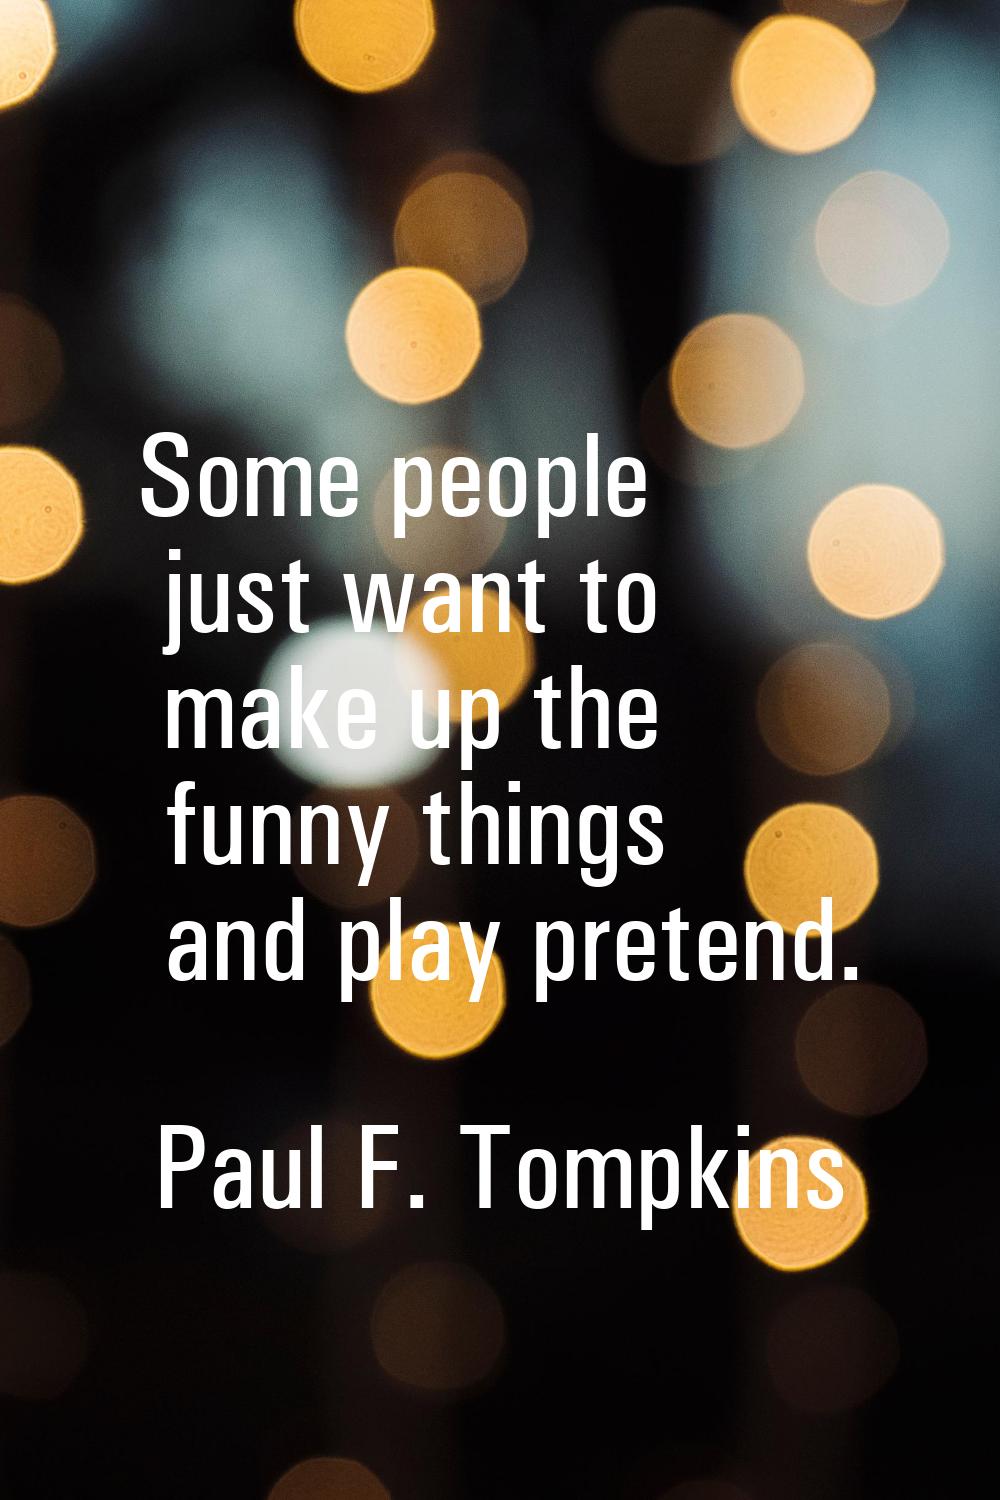 Some people just want to make up the funny things and play pretend.